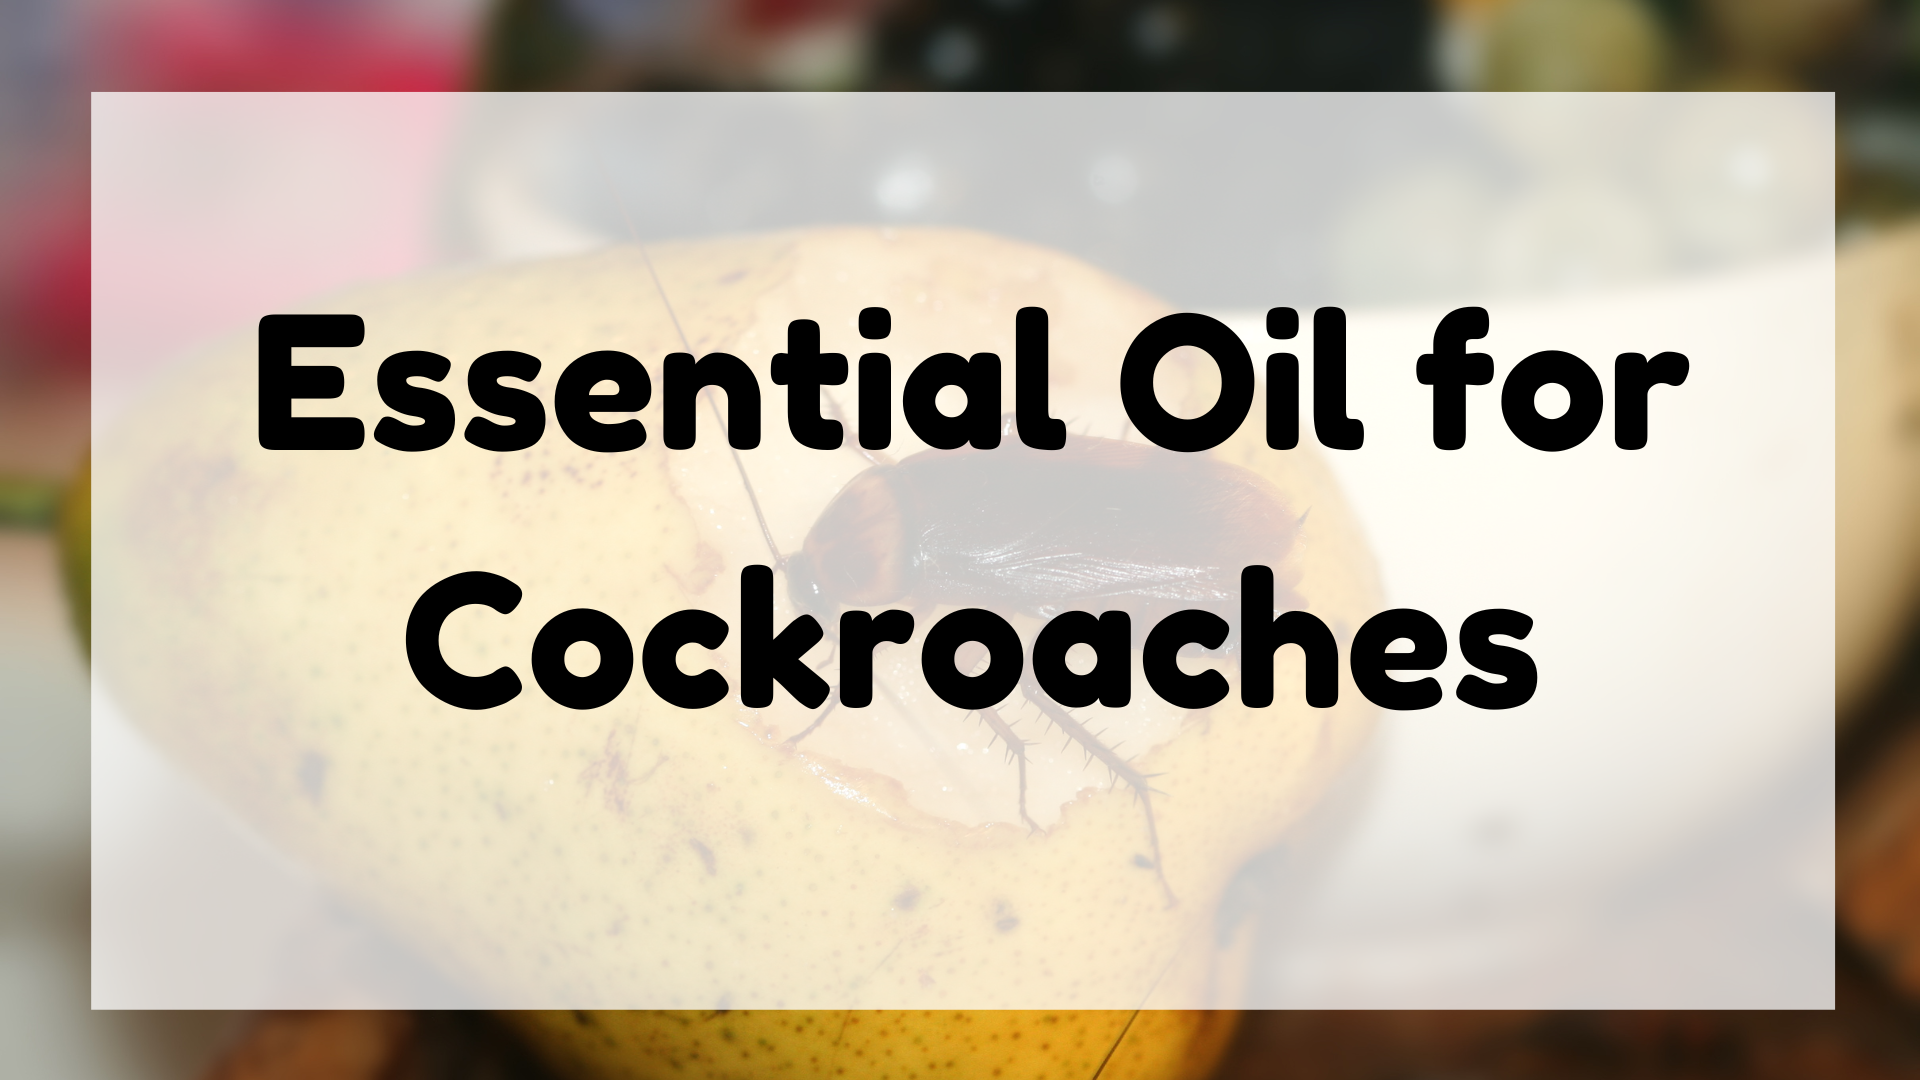 Essential Oil for Cockroaches featured image